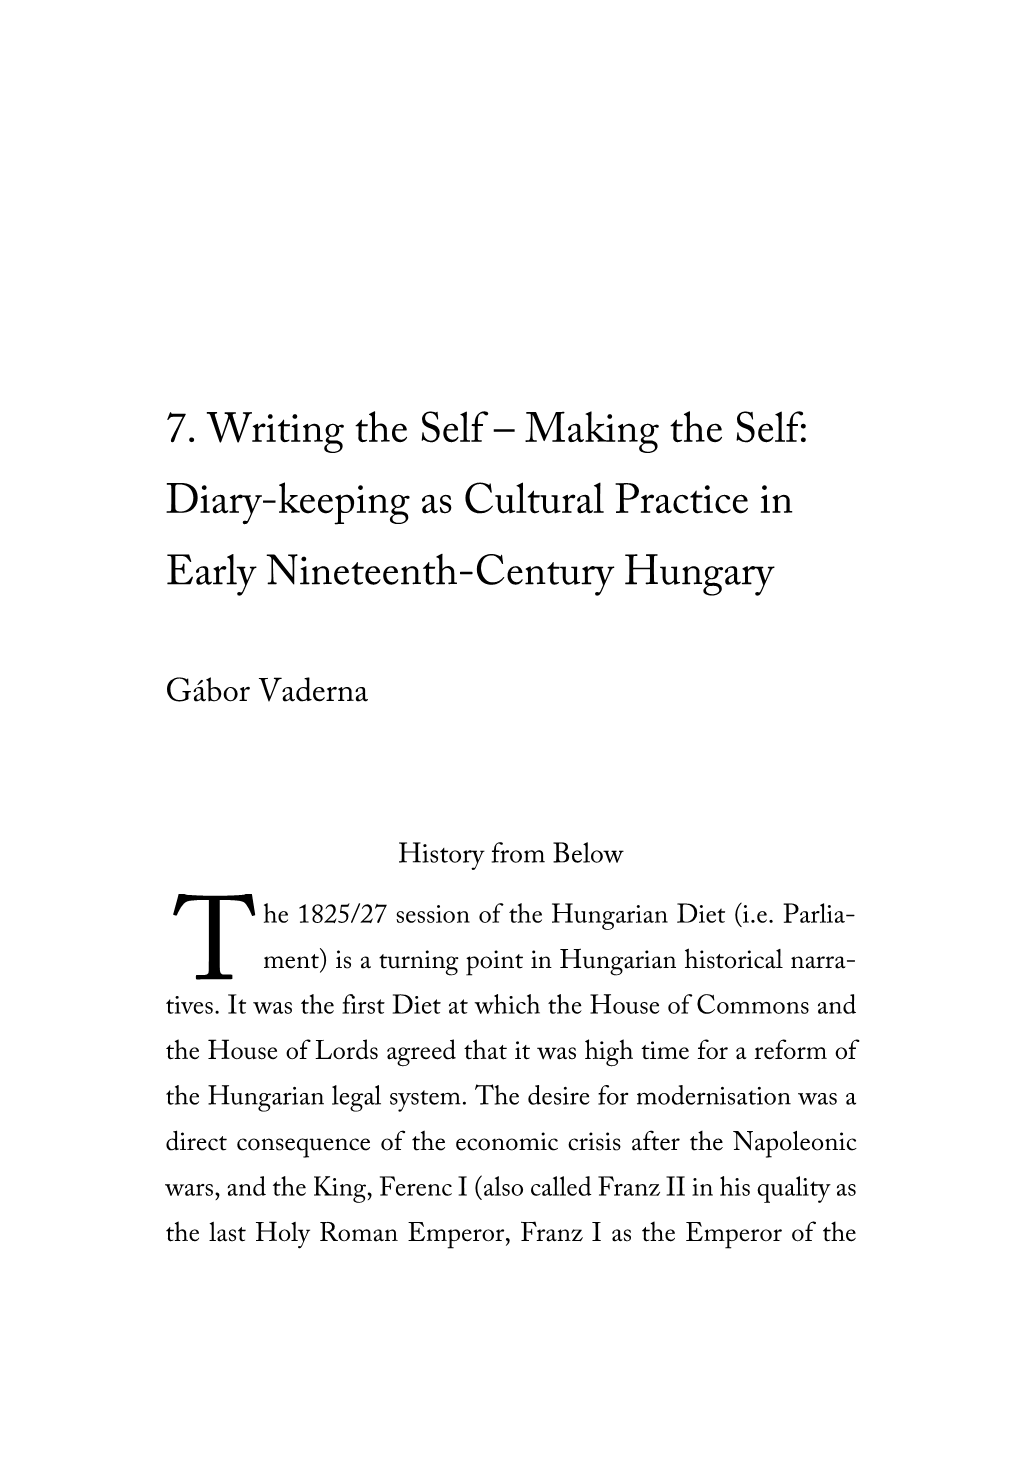 7. Writing the Self – Making the Self: Diary-Keeping As Cultural Practice in Early Nineteenth-Century Hungary